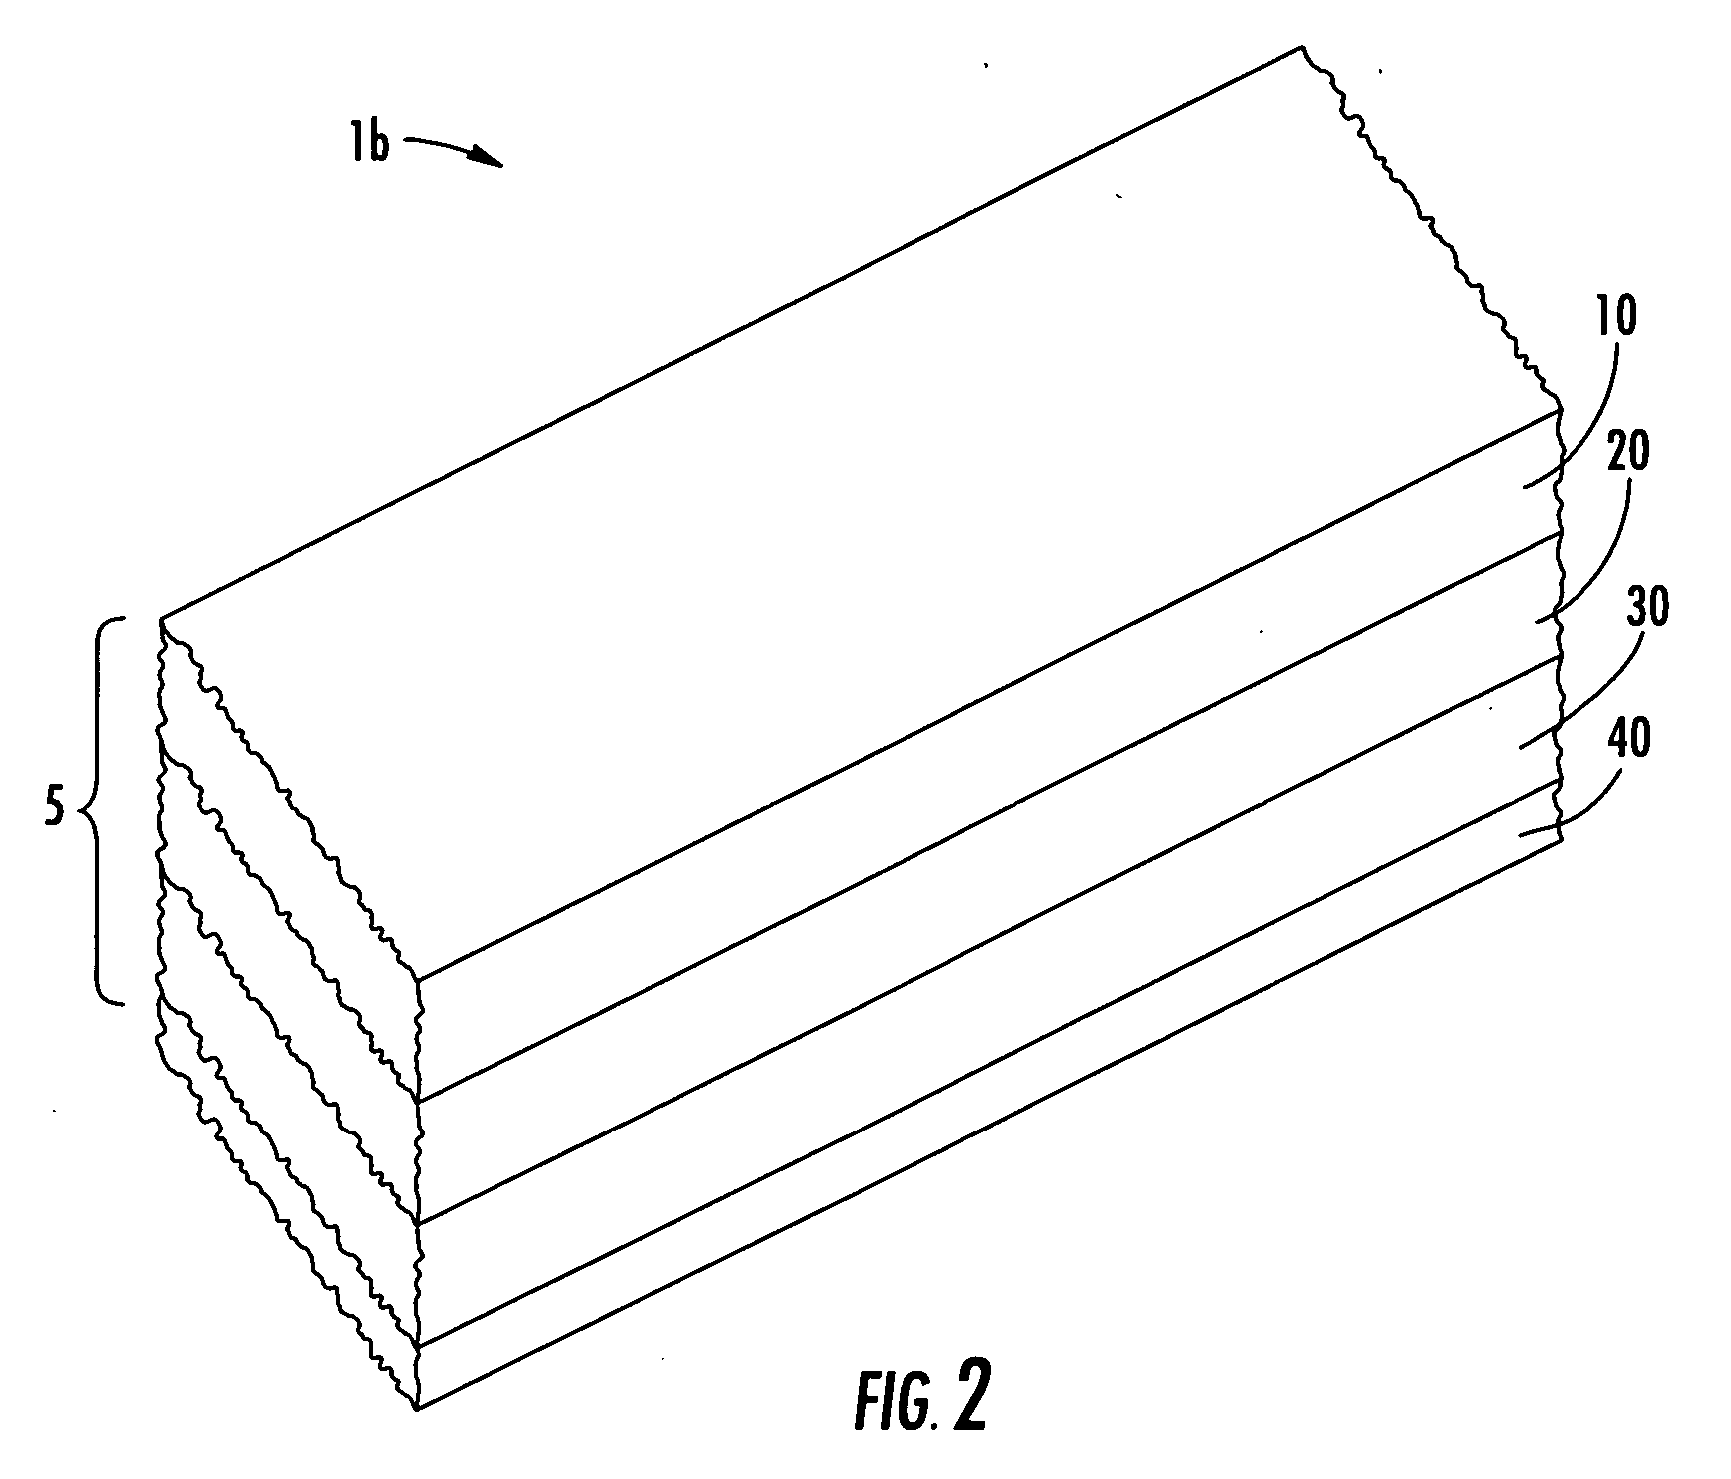 Absorbent non-woven mat having perforations or scoring